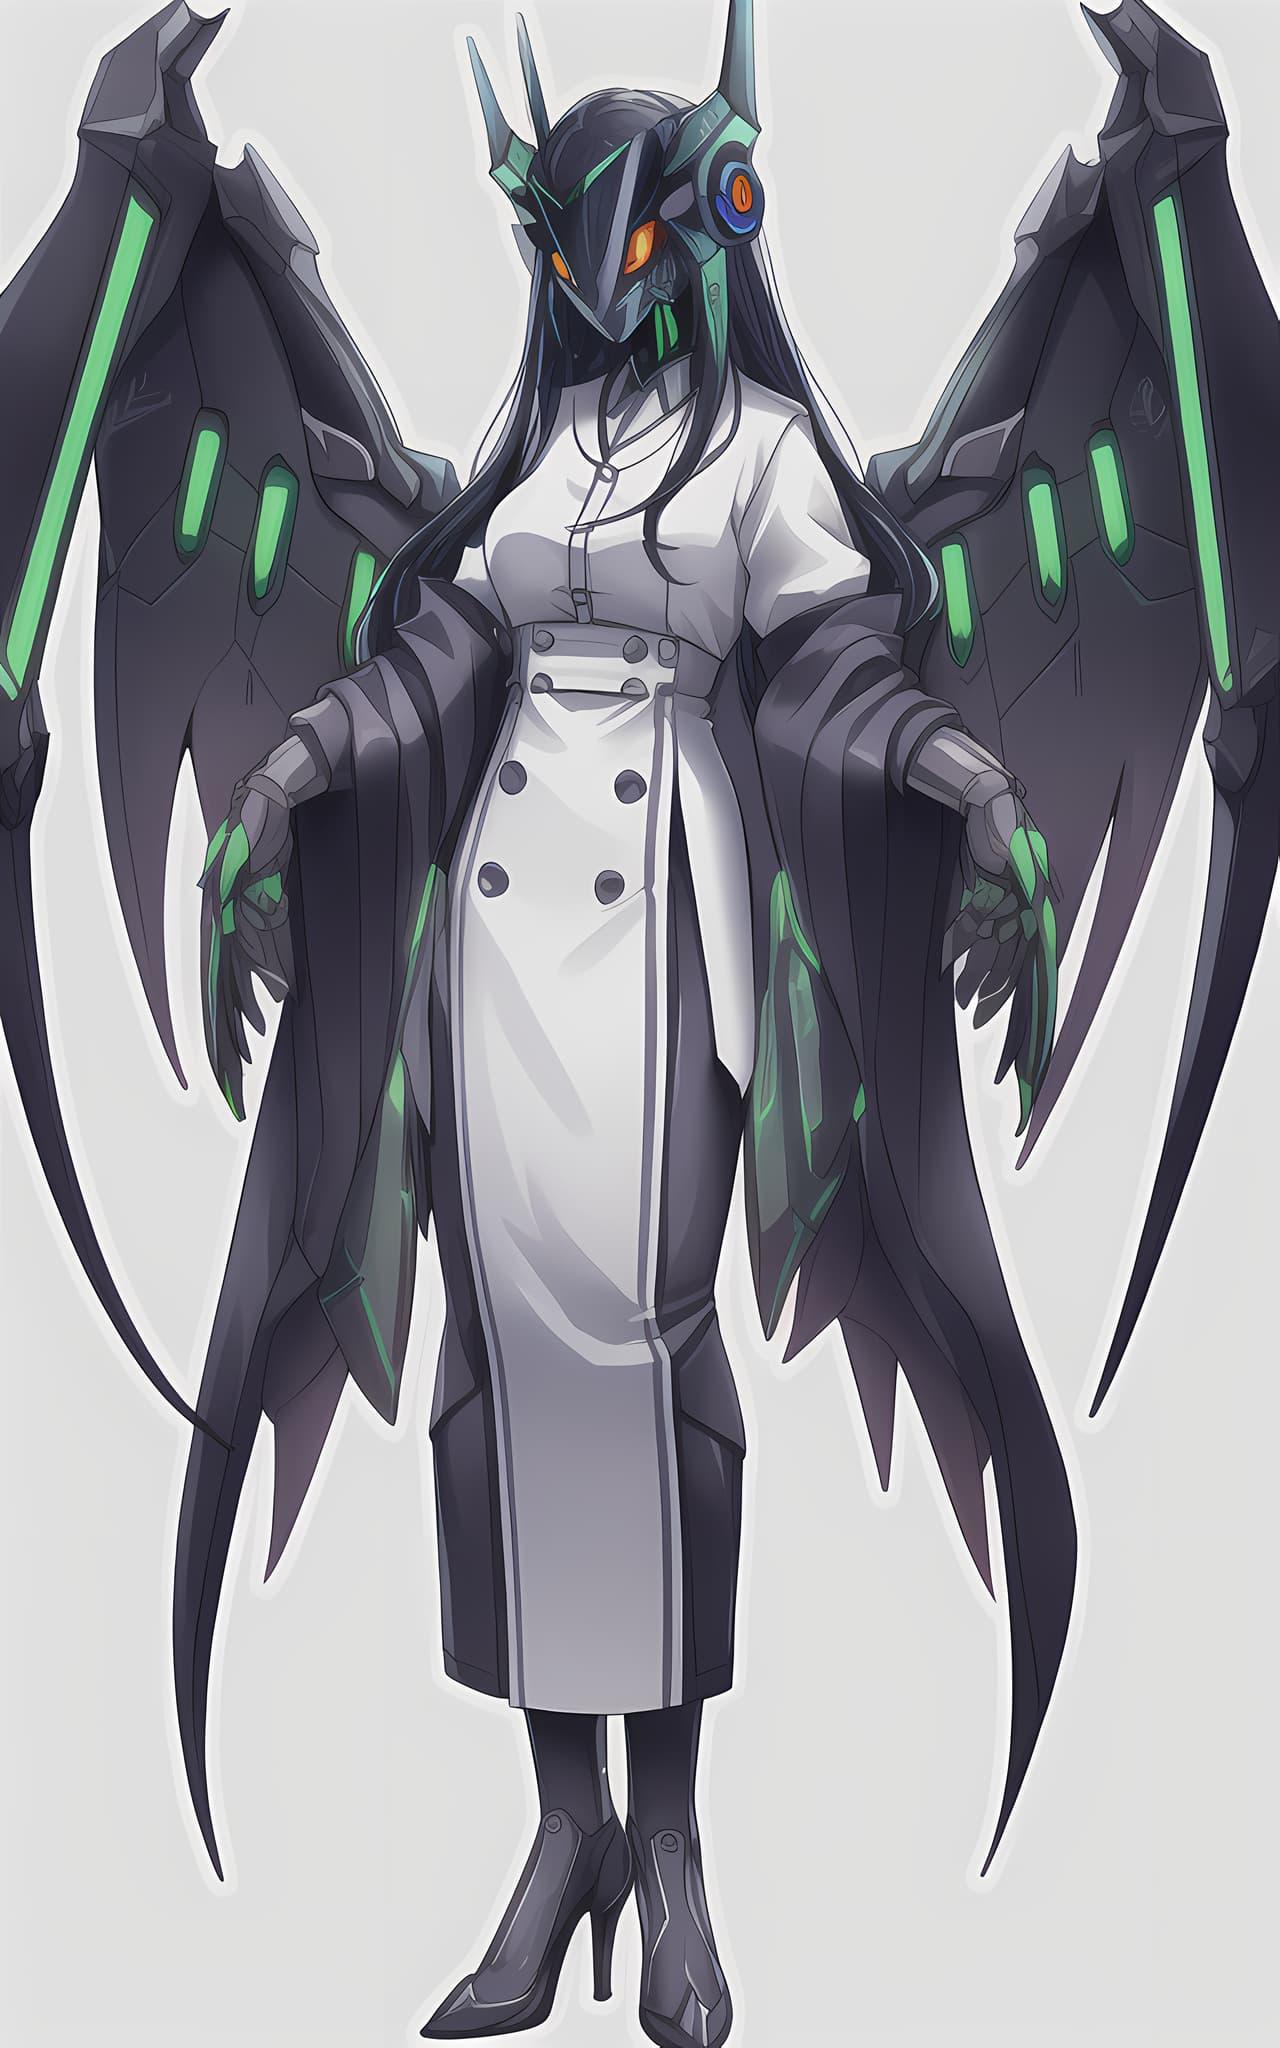 An android woman wearing a lab coat, with large mechanical wings on her back and a full-face cybernetic helmet